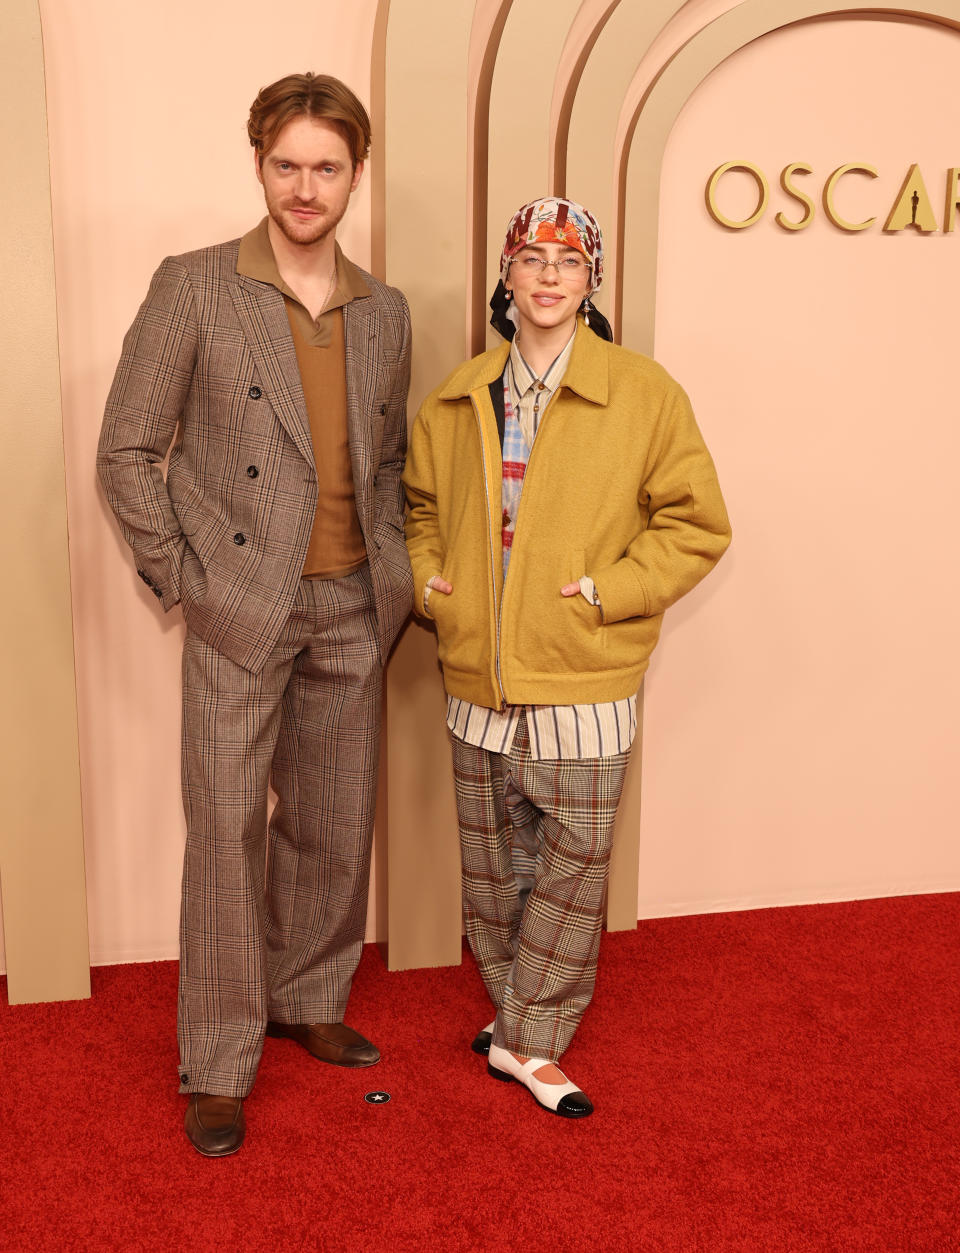 Finneas and Billie standing in front of an "OSCARS" backdrop. Finneas is wearing a checked suit